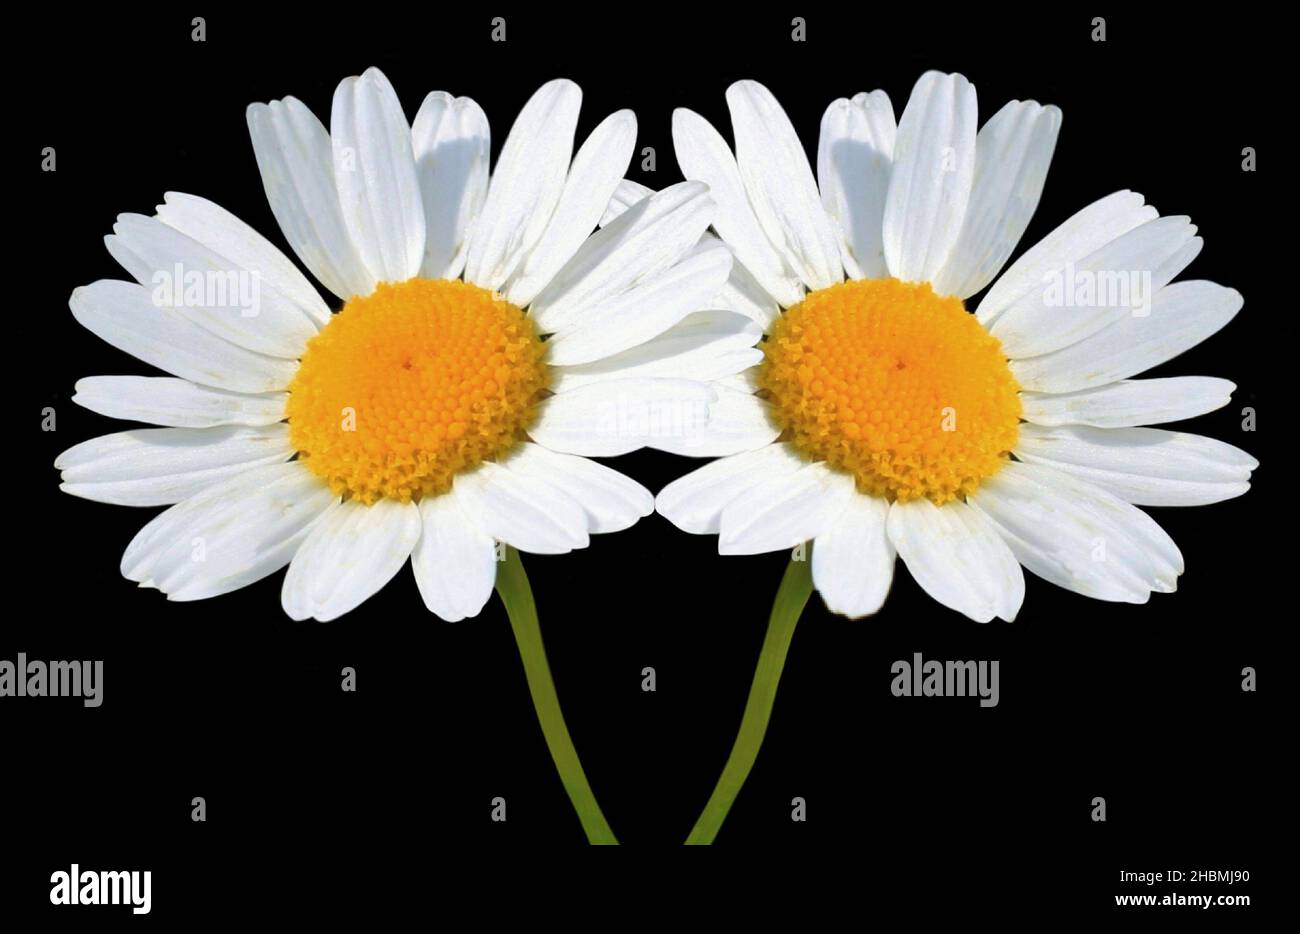 Beautiful Two White Daisy Flower On The Black Background Stock Photo